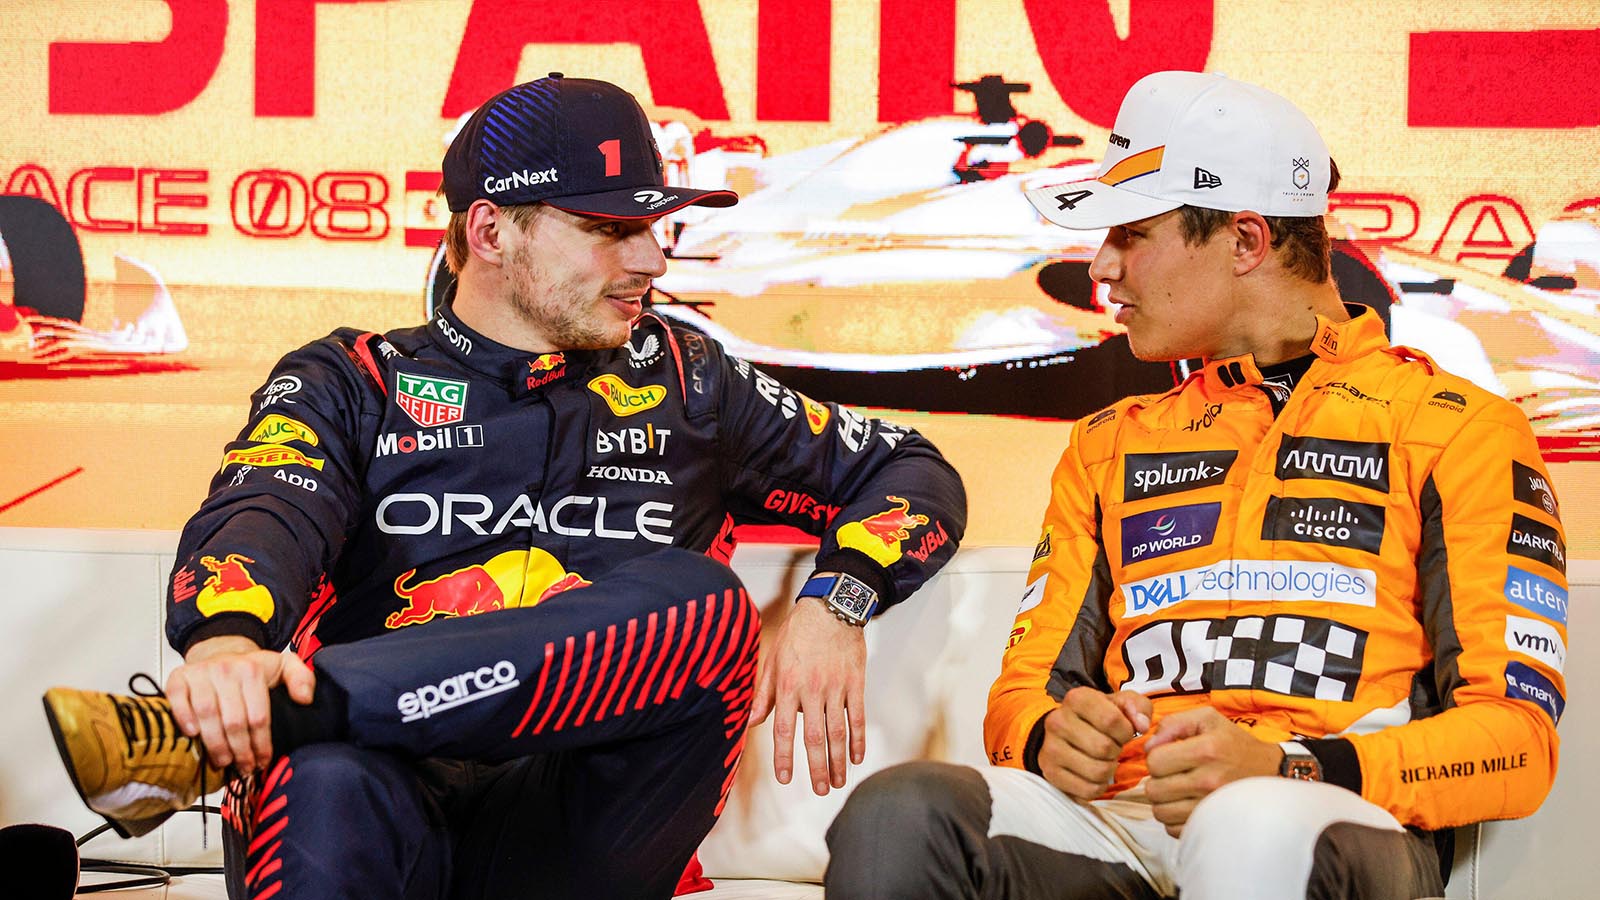 Respective Red Bull and McLaren drivers Max Verstappen and Lando Norris on press conference duties in Spain. June 2023